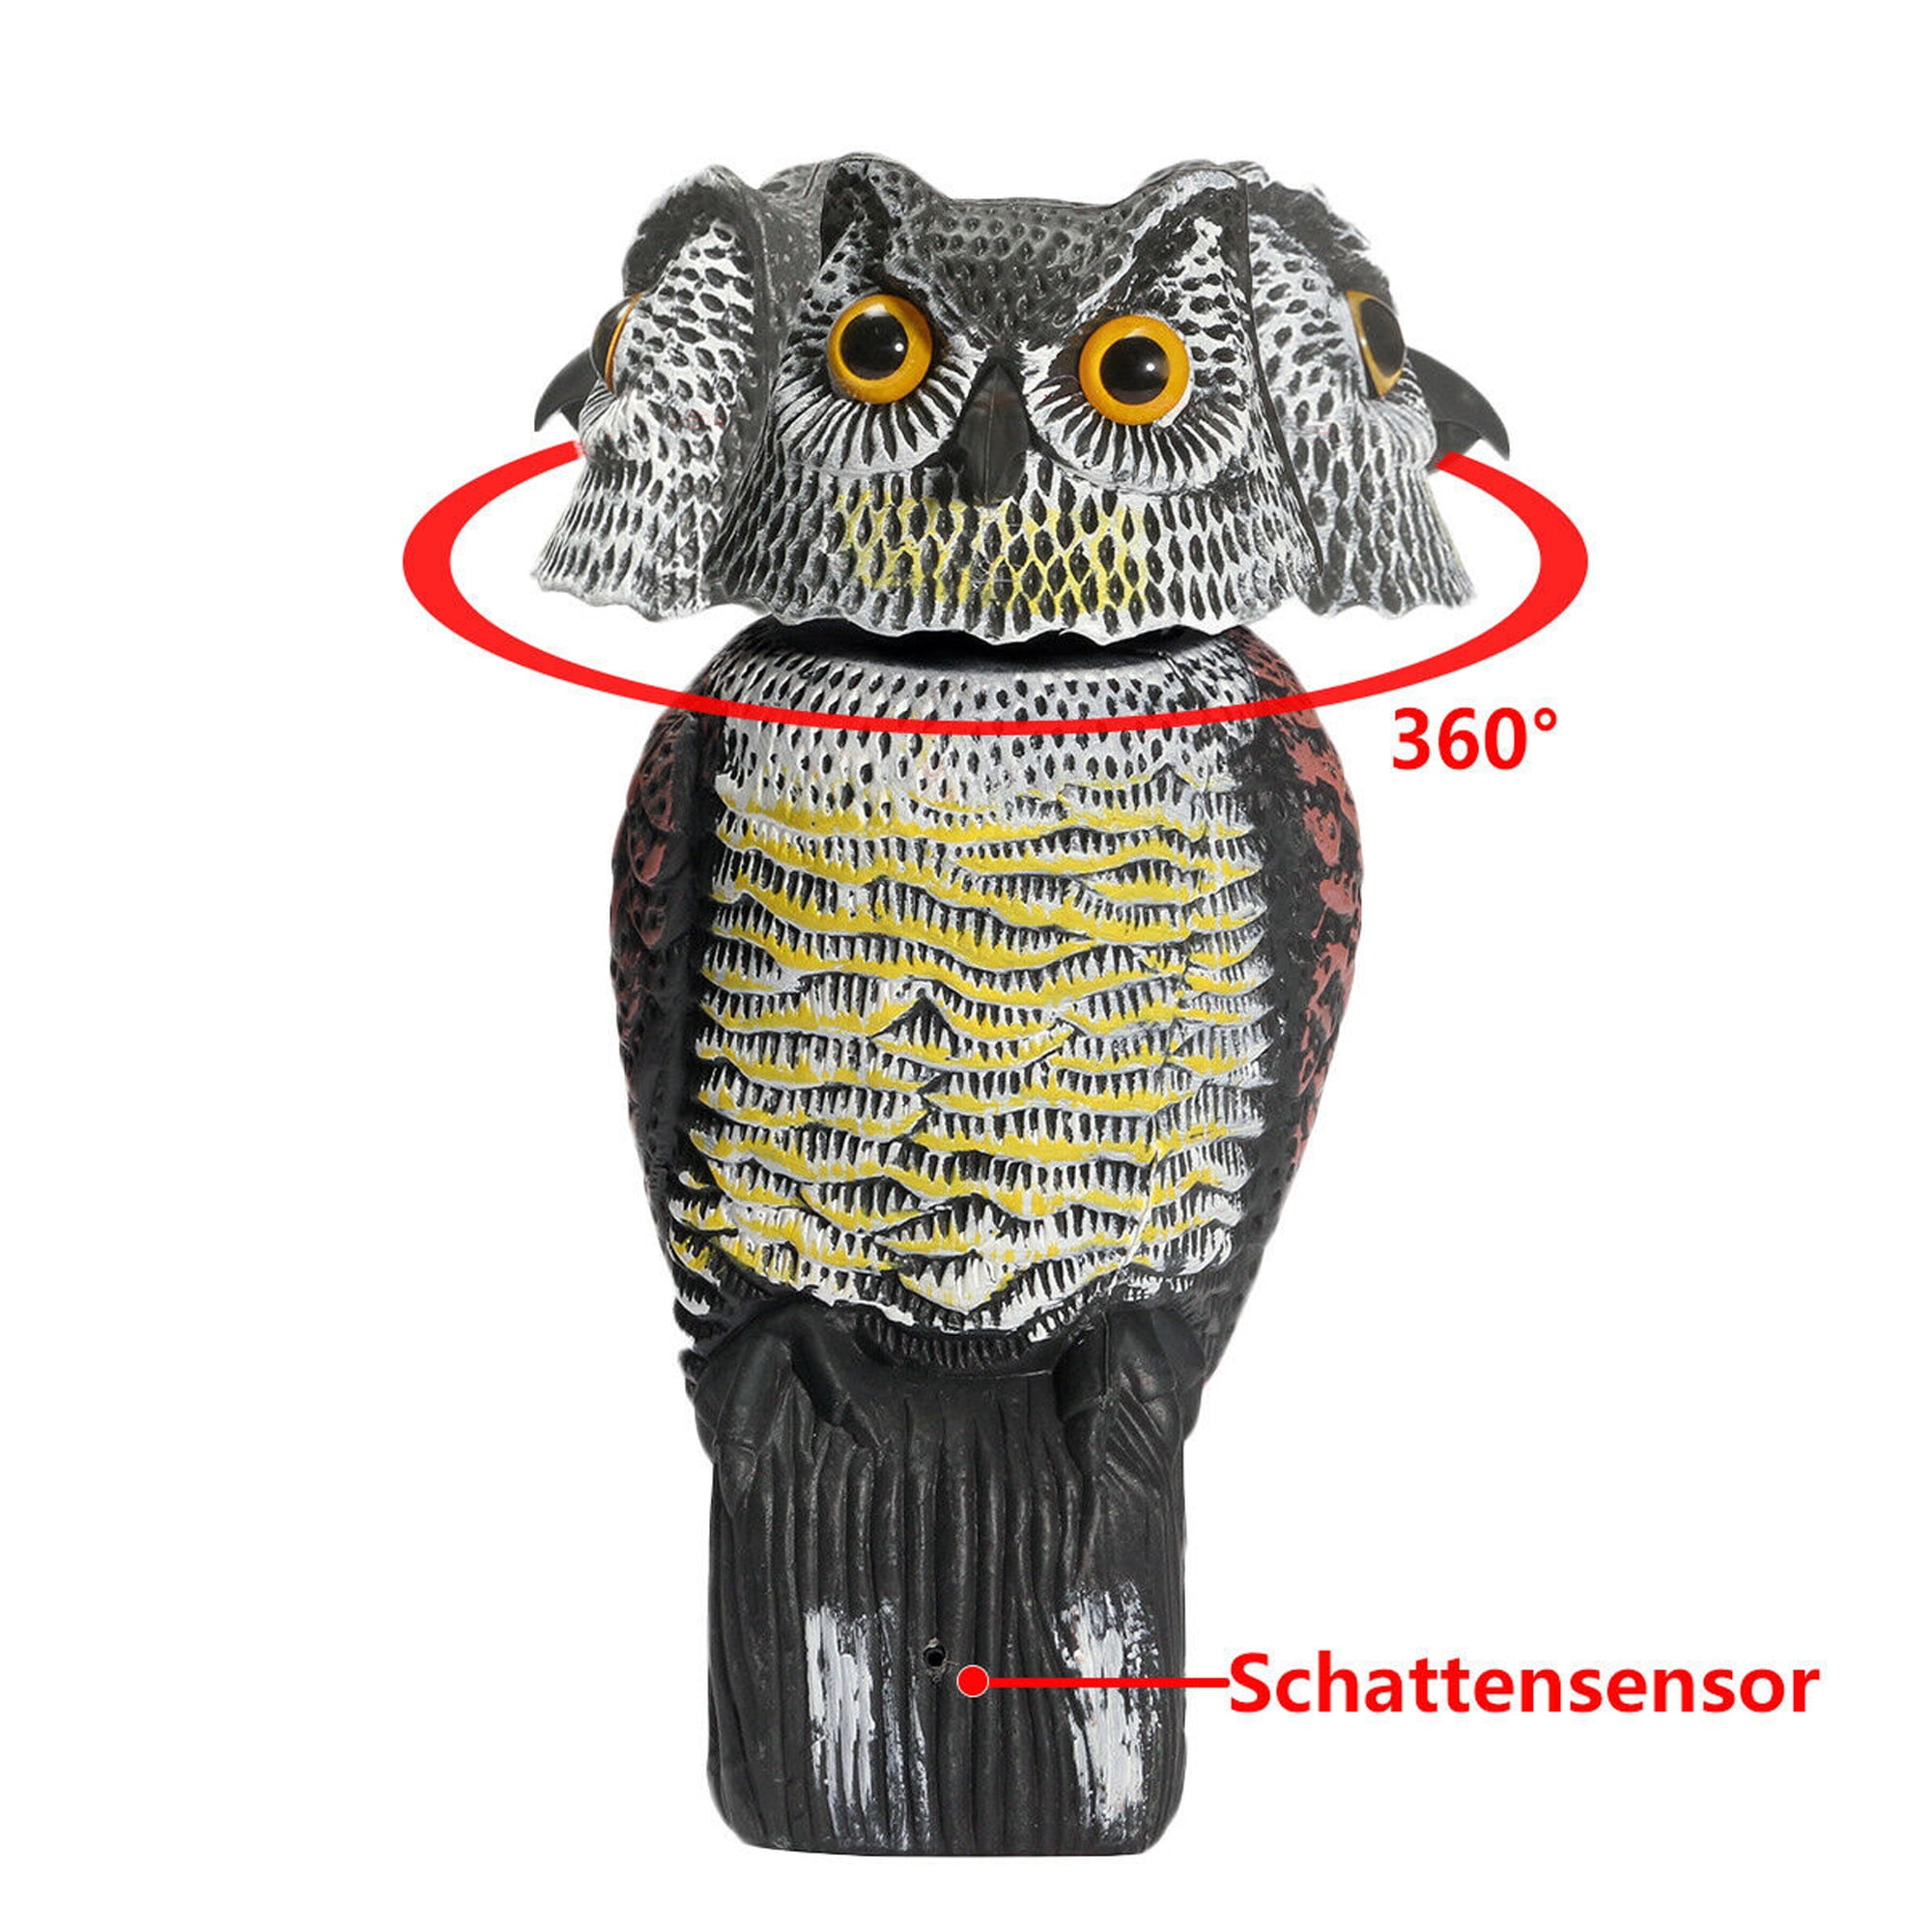 Squirrels Rabbits CampFENSE Owl Decoy with Rotating Head Garden Protector Sculpture for Birds Mice Black-New 